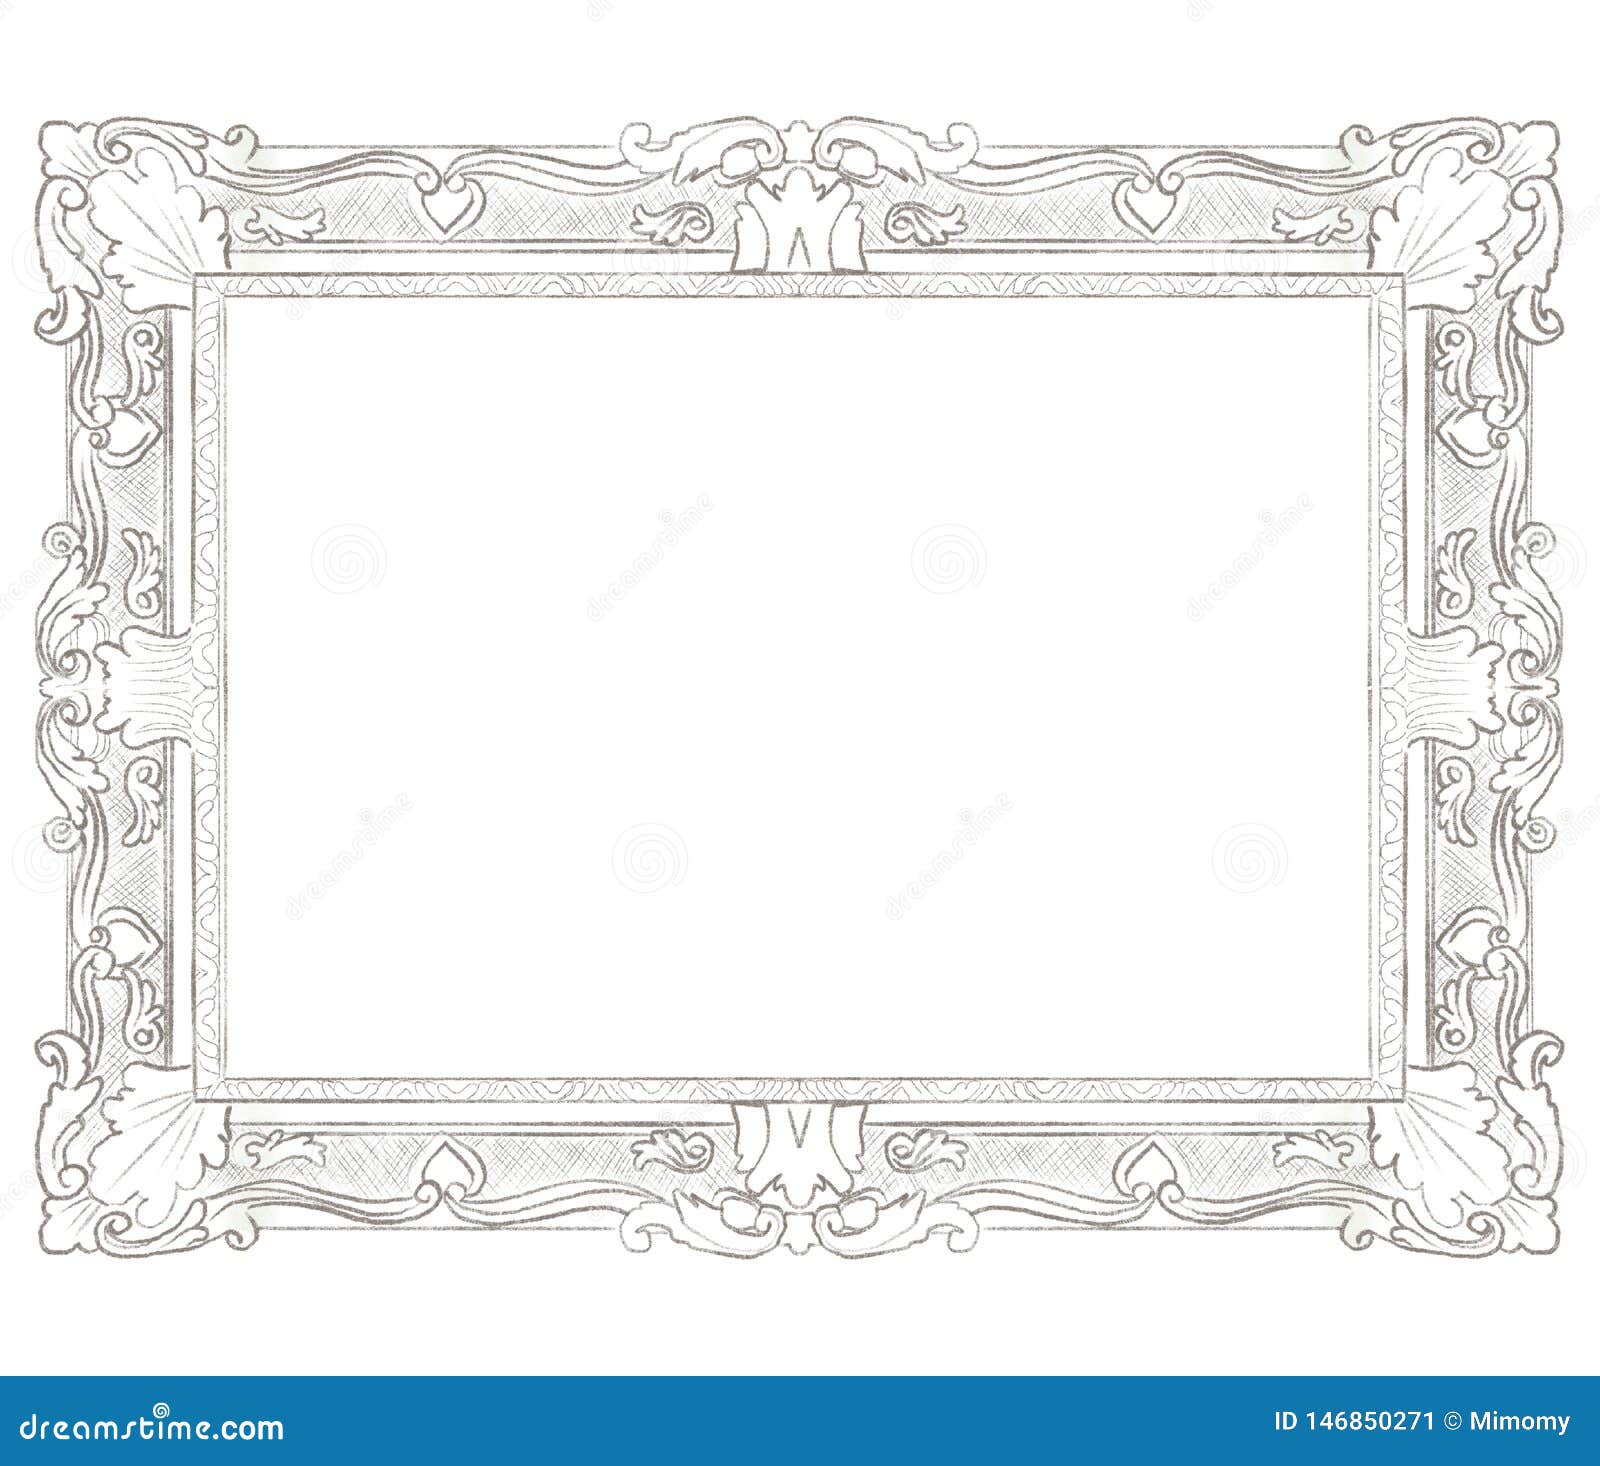 Pencil Drawing With Classic Rectangular Frame Stock